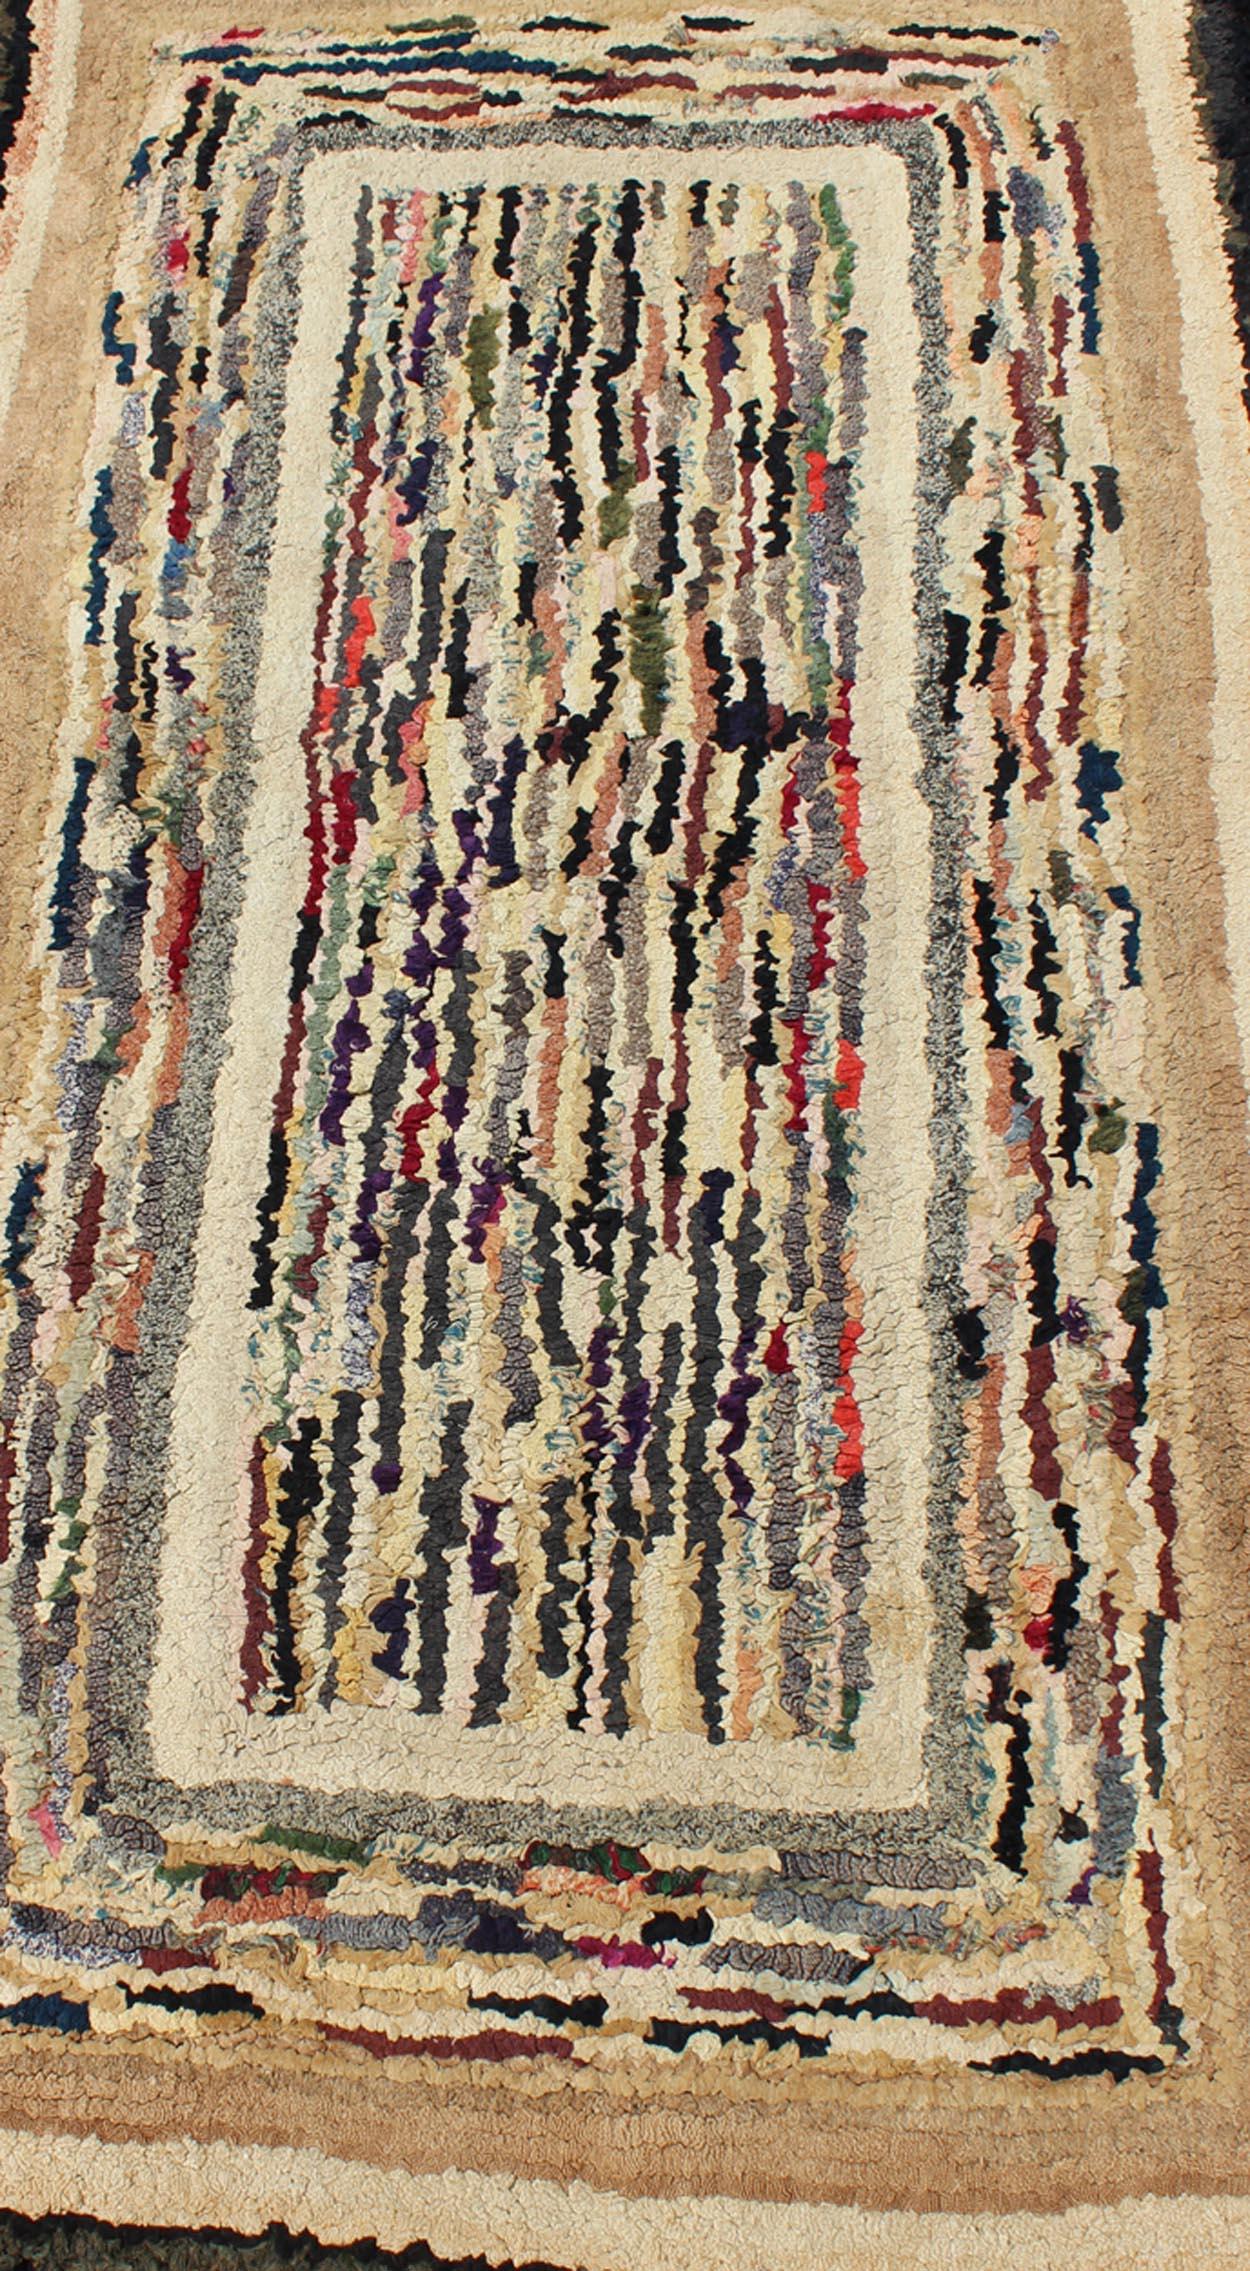 American Hooked Rug with Variegated Design in Black, Brown and Taupe In Good Condition For Sale In Atlanta, GA